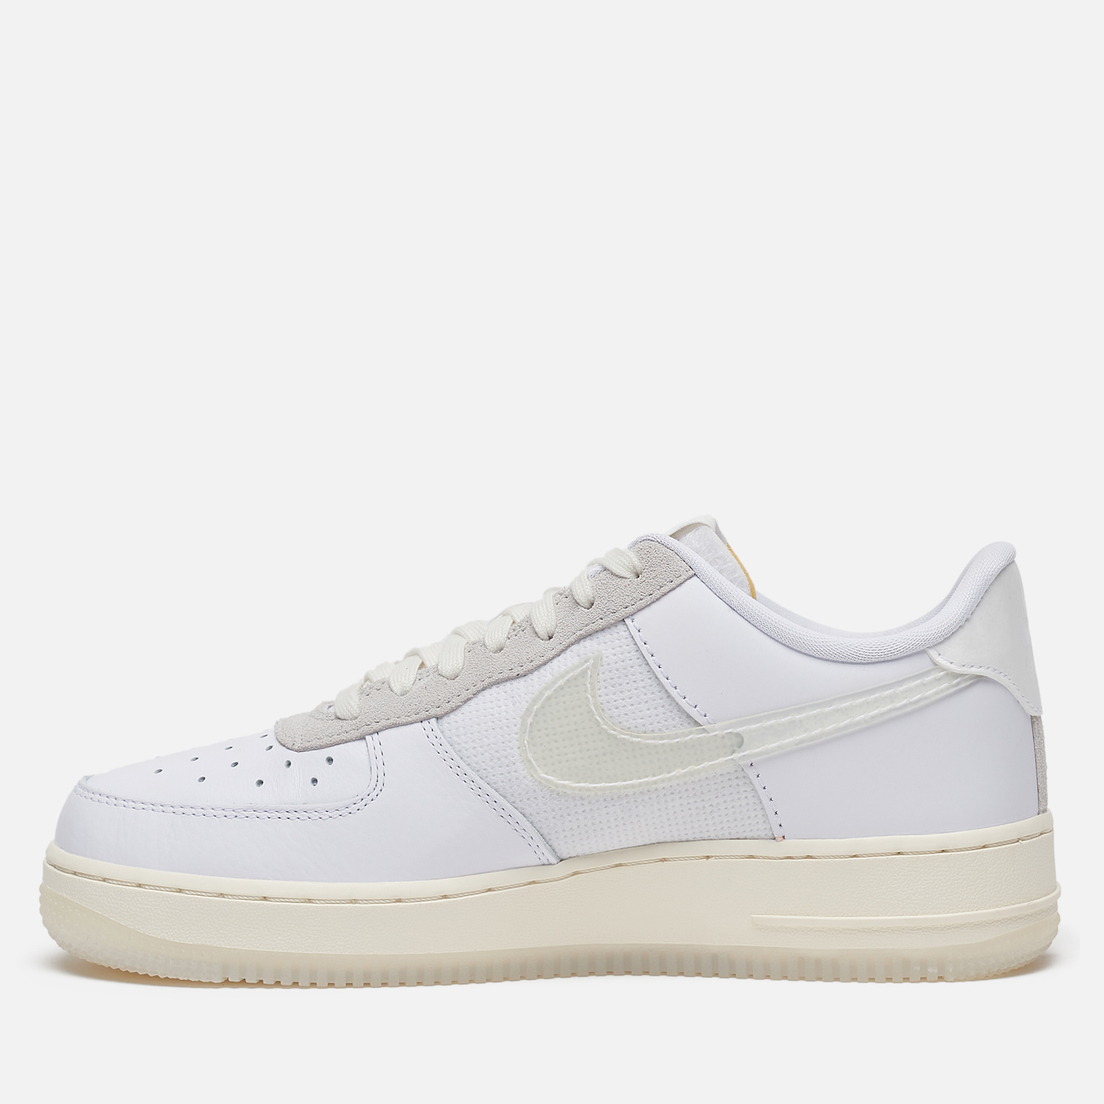 nike air force one lv8 dna